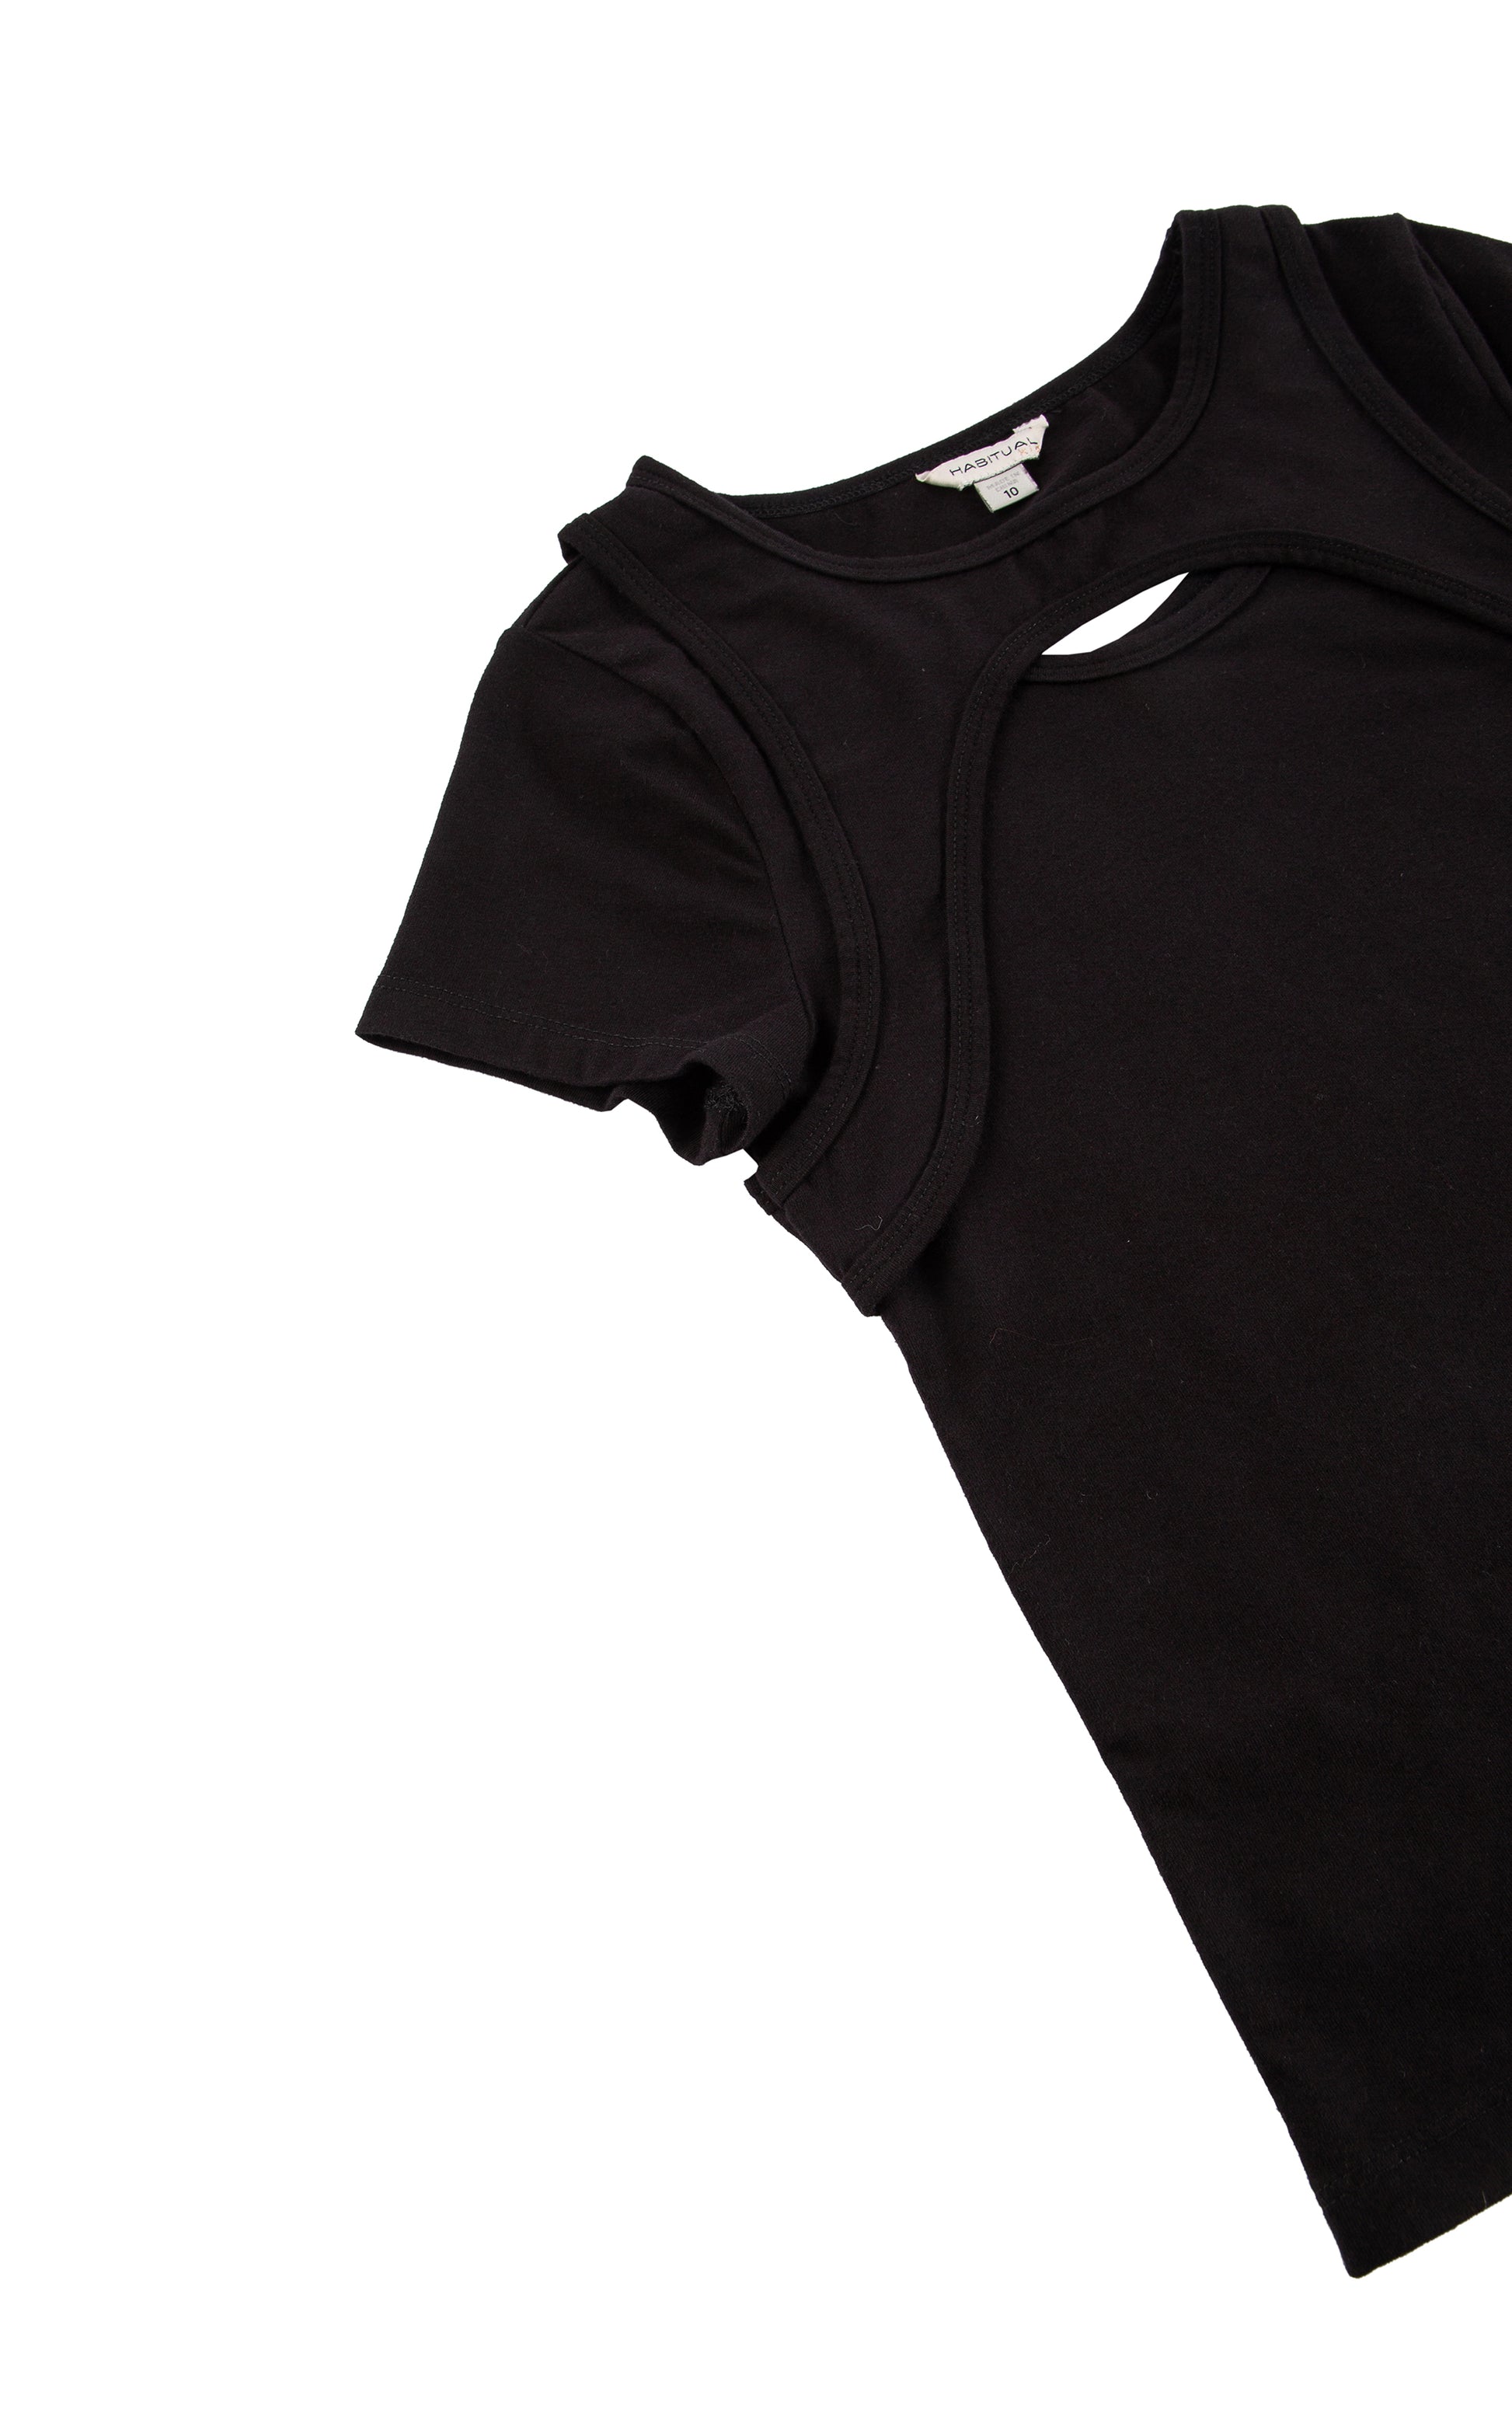 CLOSE UP OF BLACK SHORT SLEEVE TOP WITH A SMALL KEYHOLE CUT-OUT AT THE UPPER BODICE